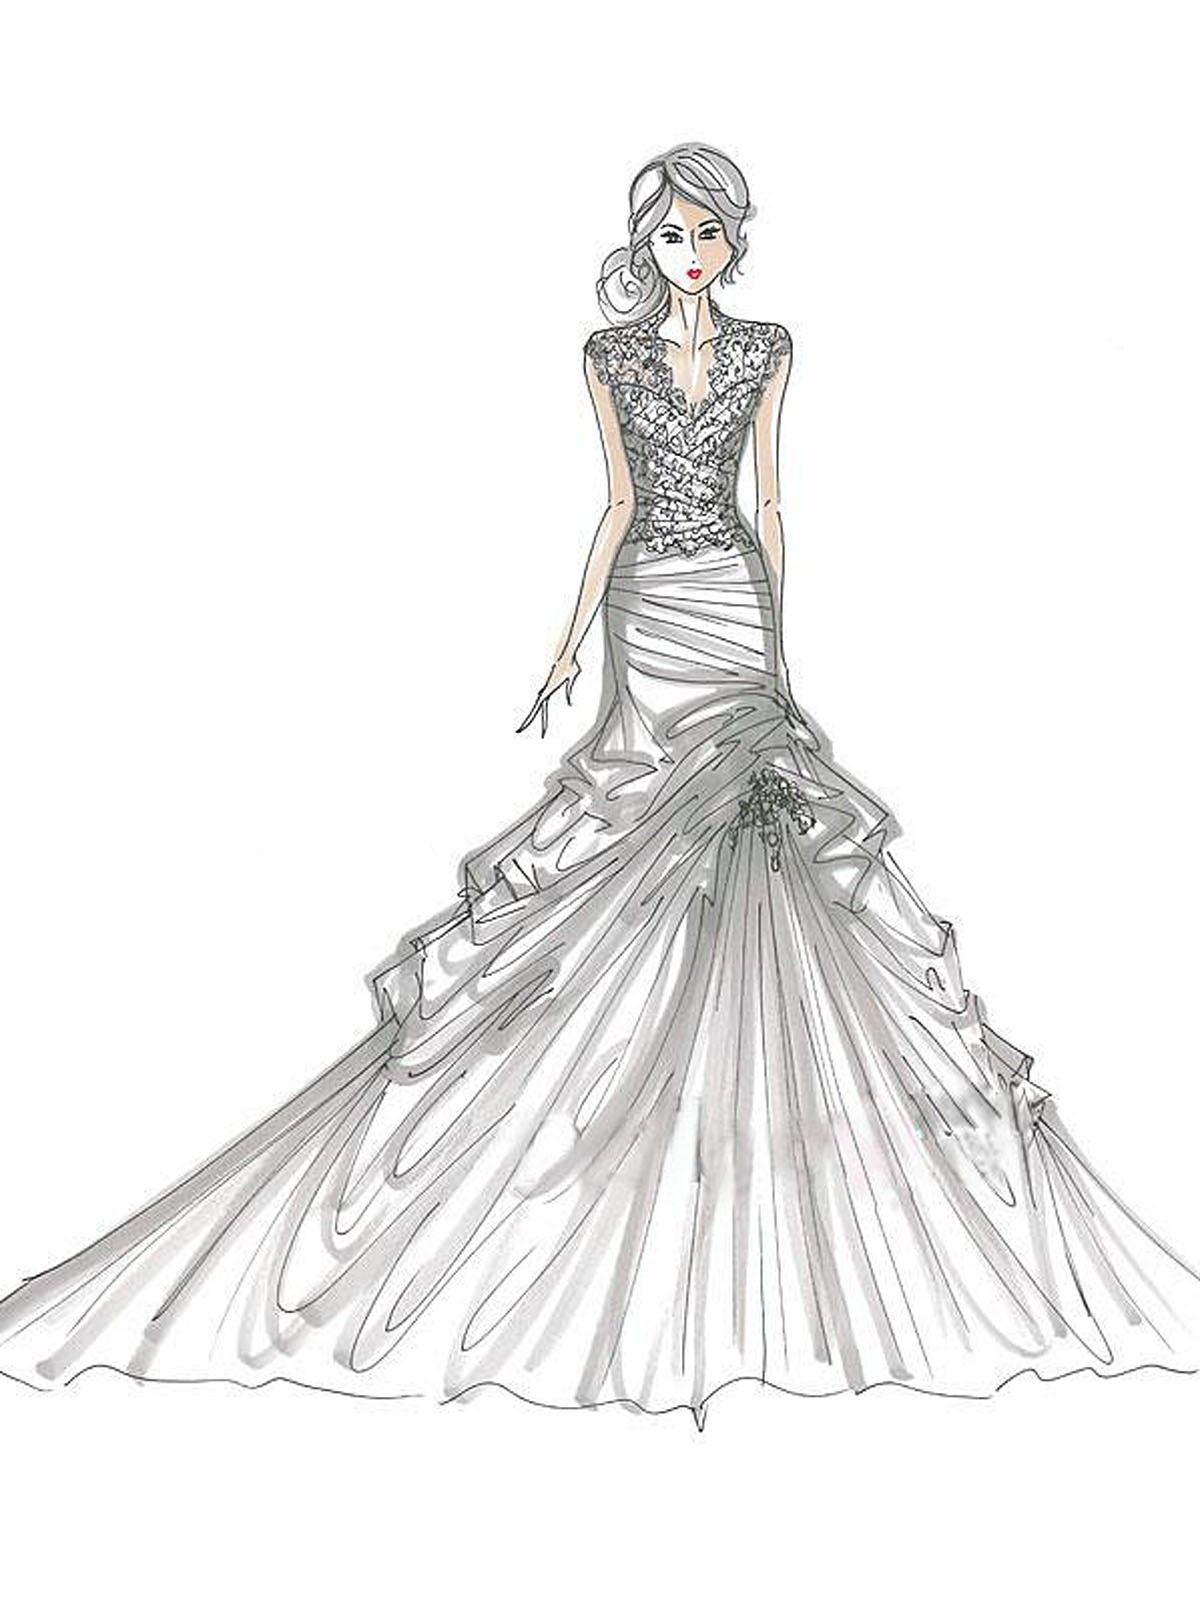 Of Wedding Dresses | Coloring Pages for Kids and for Adults